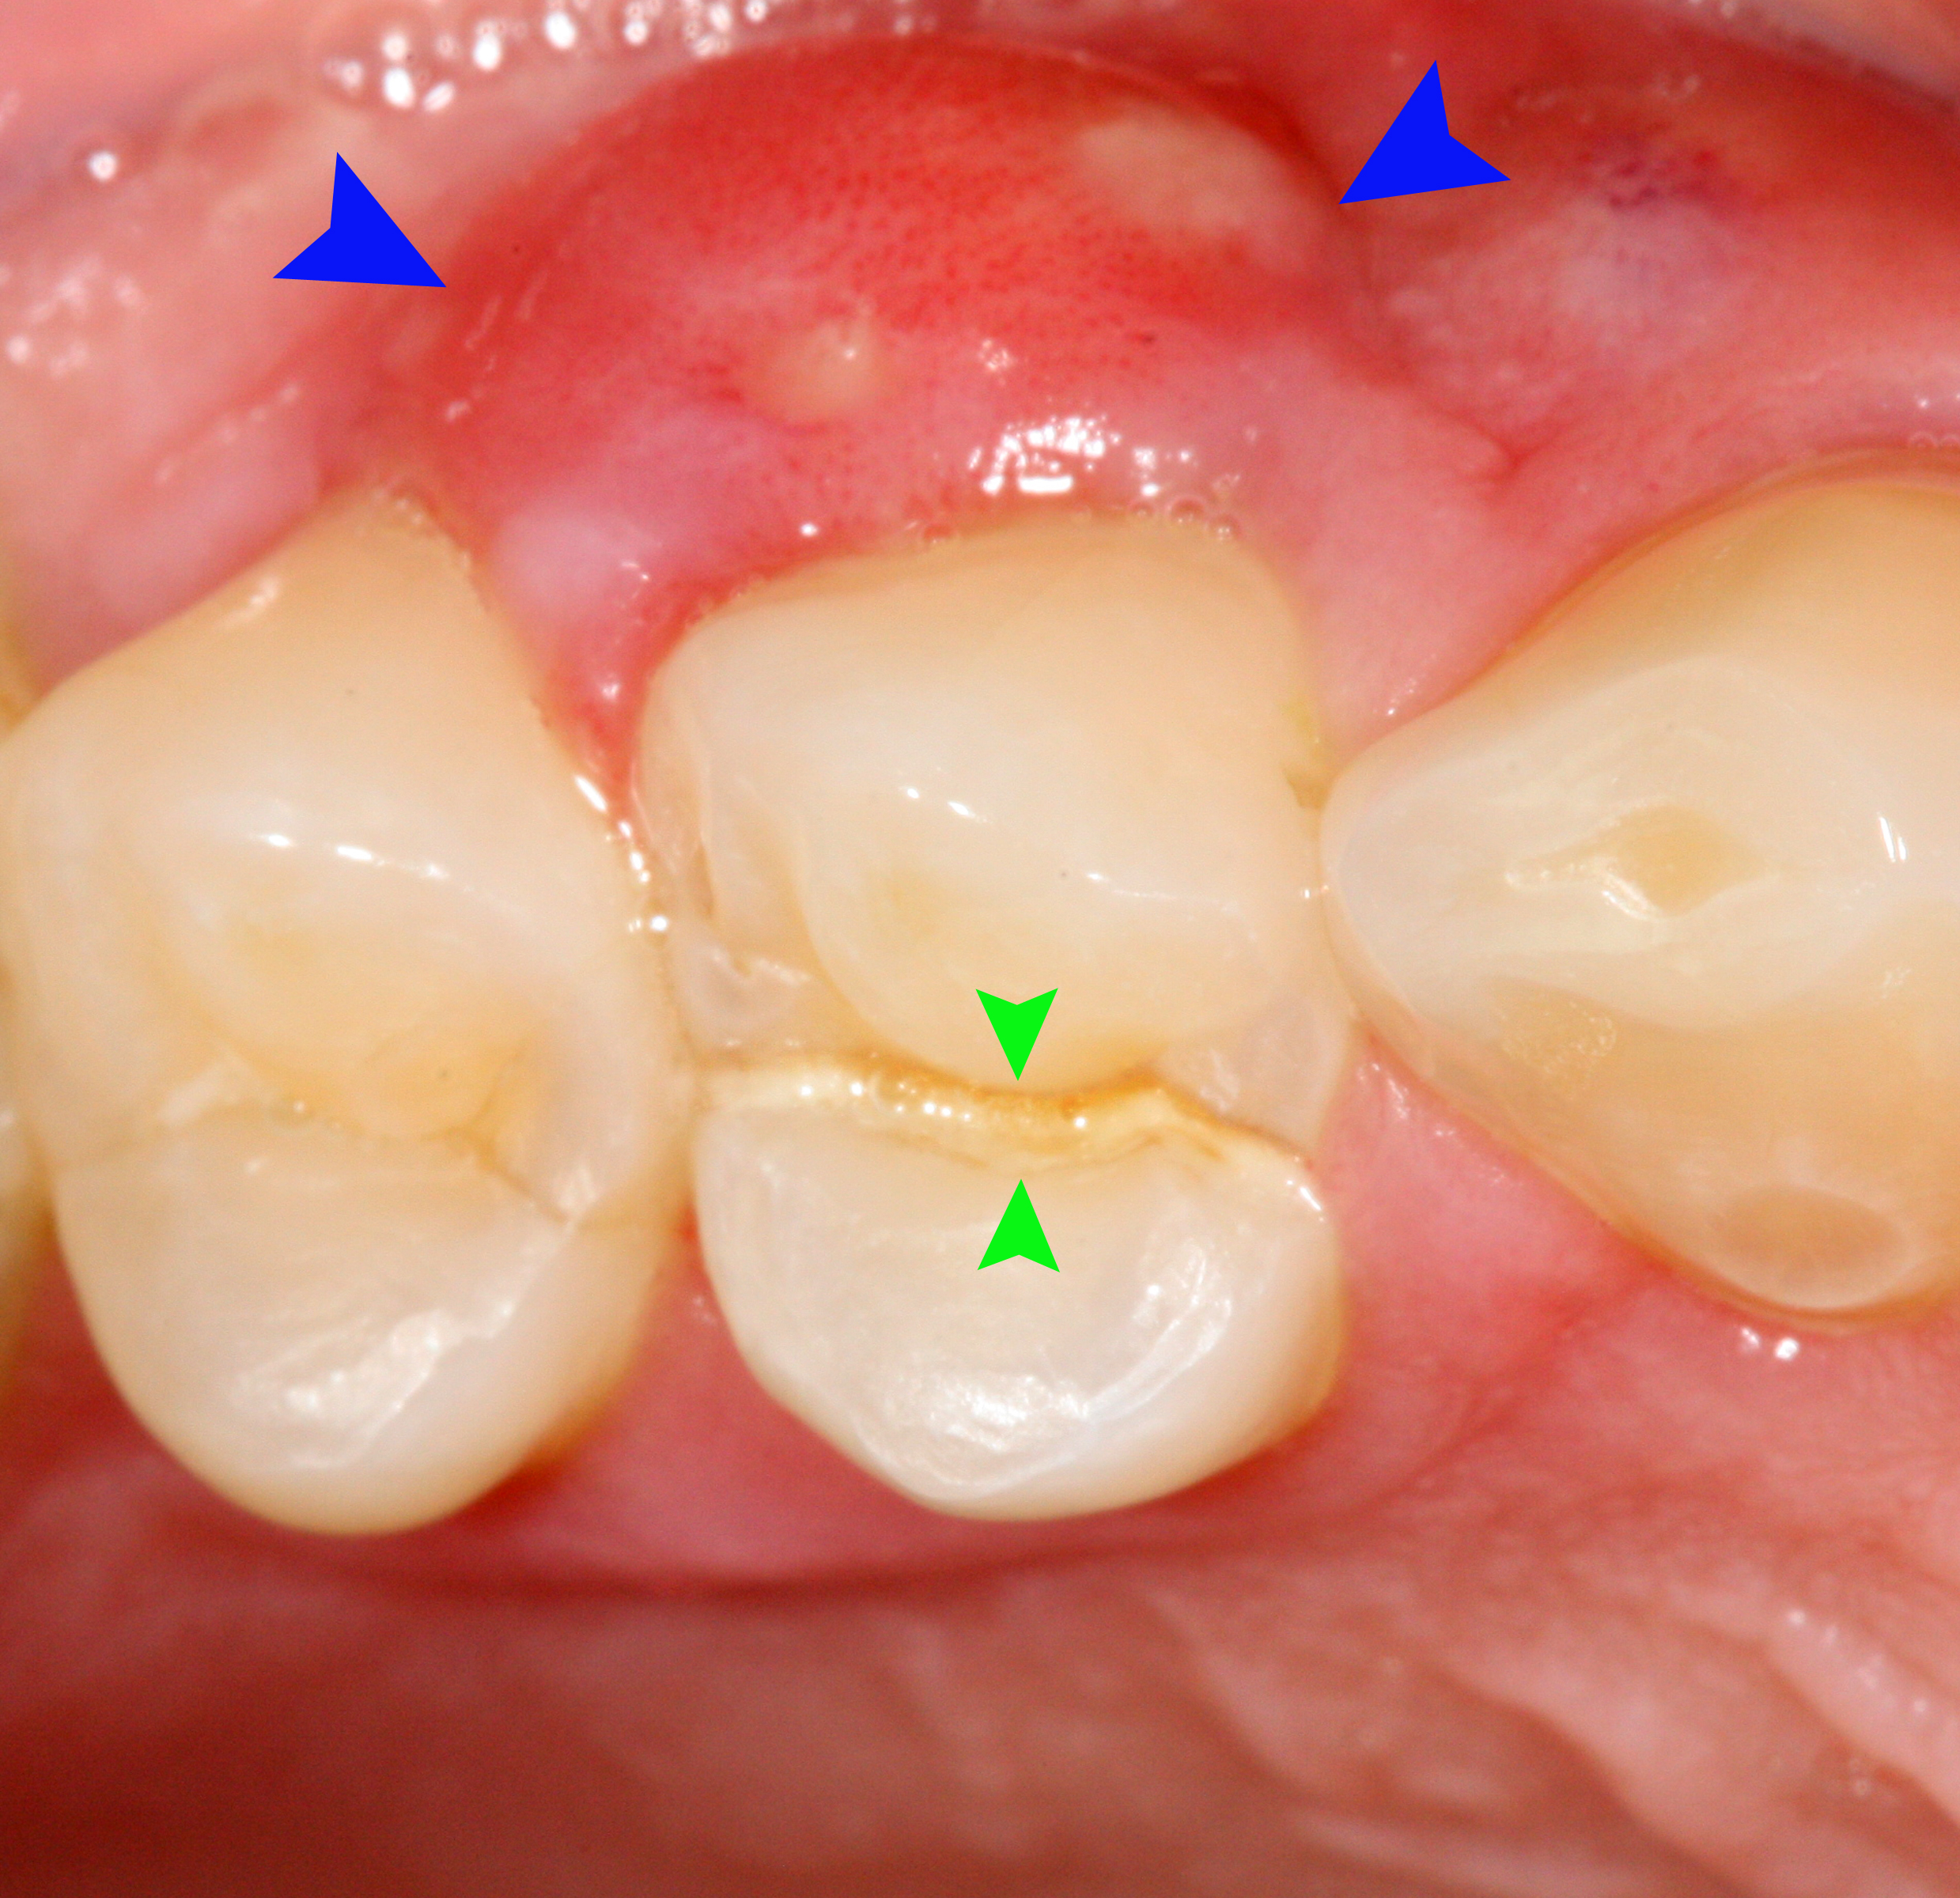 Vertical fracture of upper first premolar (green arrows) has caused a periodontal abscess (blue arrows).